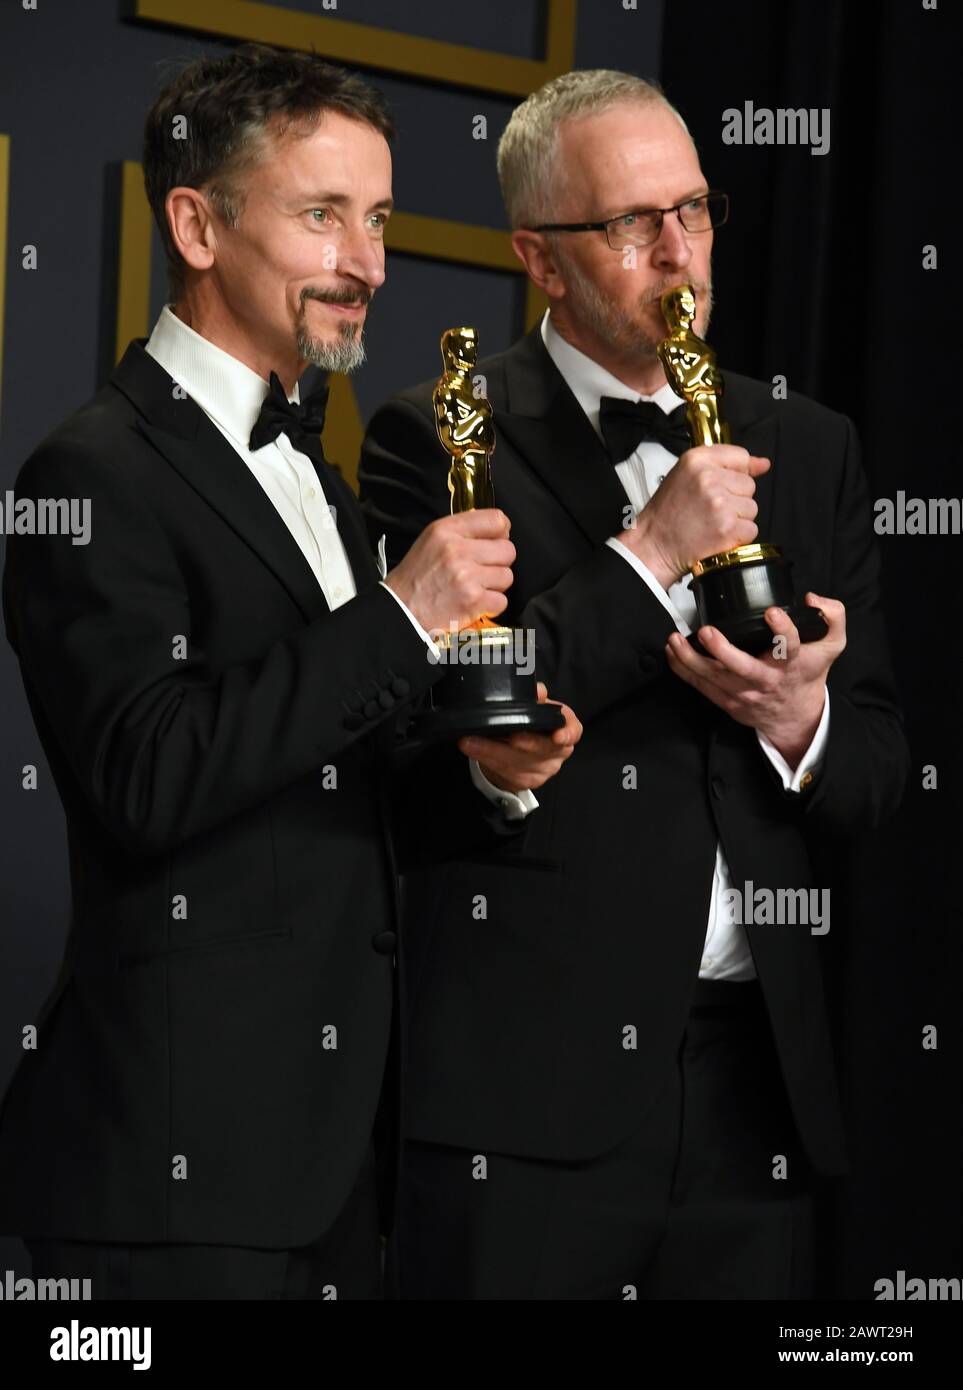 Mark Taylor and Stuart Wilson with the Best Sound Mixing Oscar for 1917 in  the press room at the 92nd Academy Awards held at the Dolby Theatre in  Hollywood, Los Angeles, USA